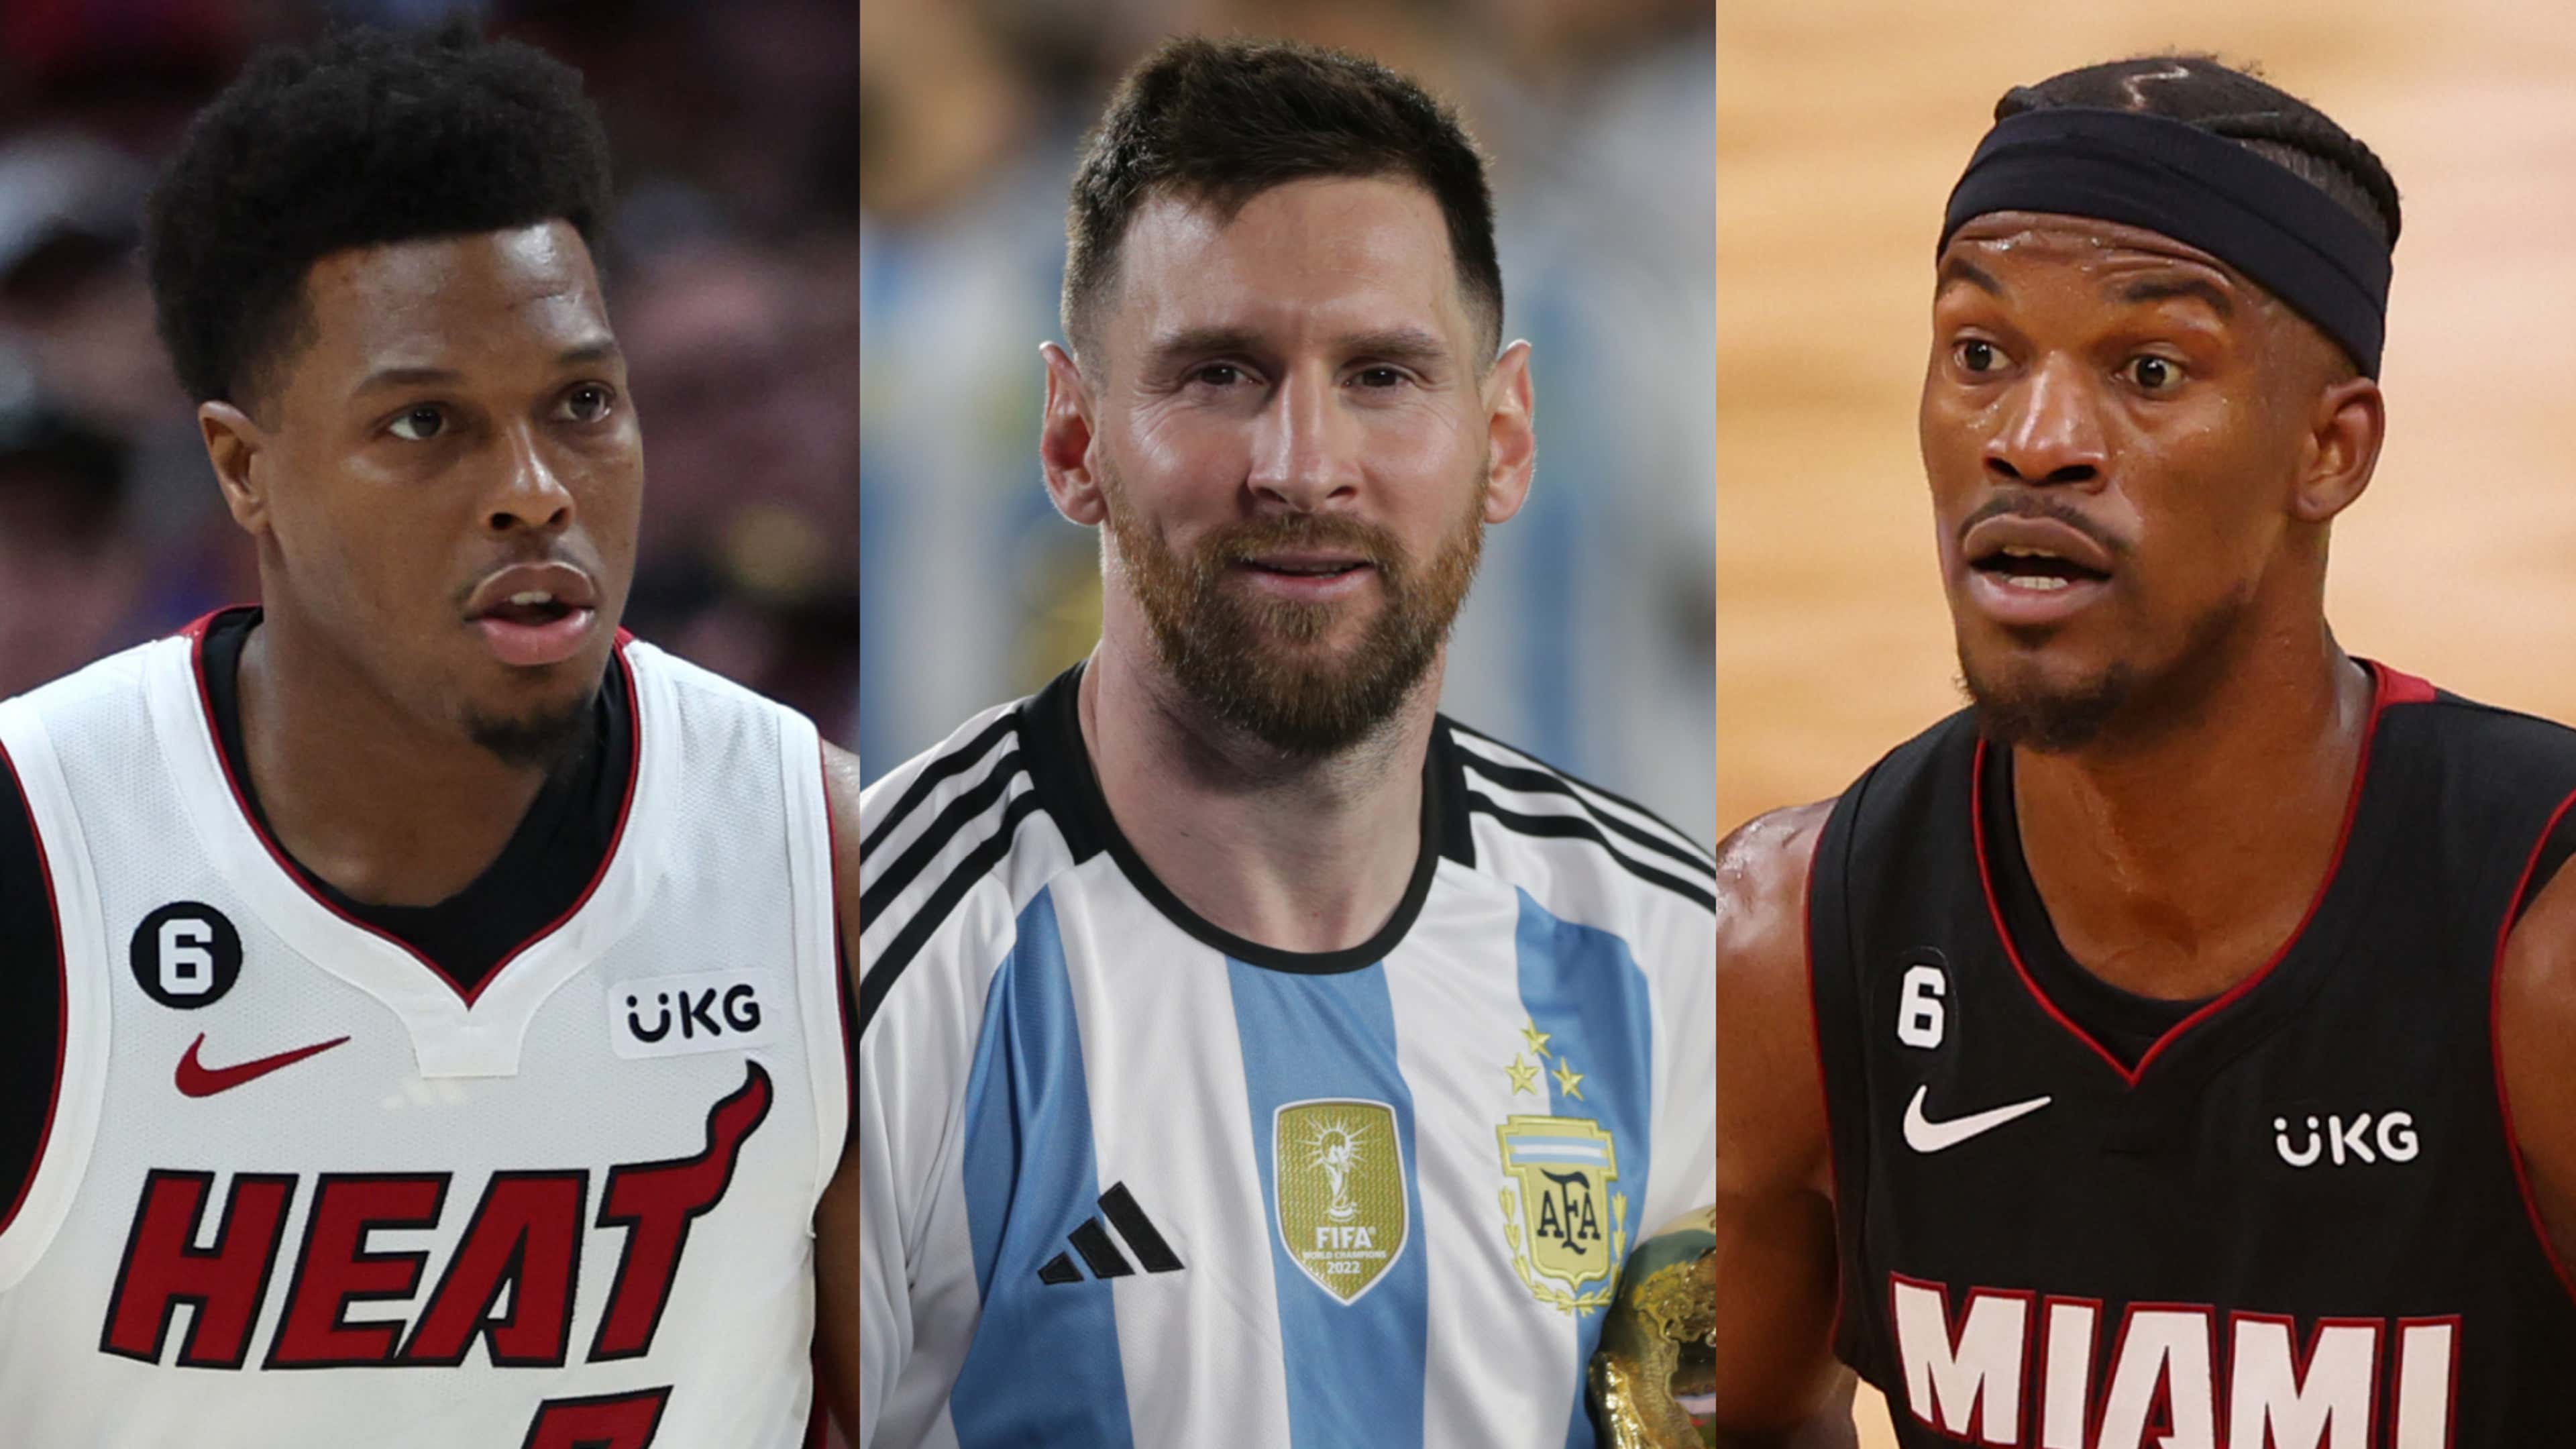 He's getting a lot of money!' - Lionel Messi's arrival at Inter Miami  excites Heat stars Jimmy Butler & Kyle Lowry as they chase down NBA Finals  glory